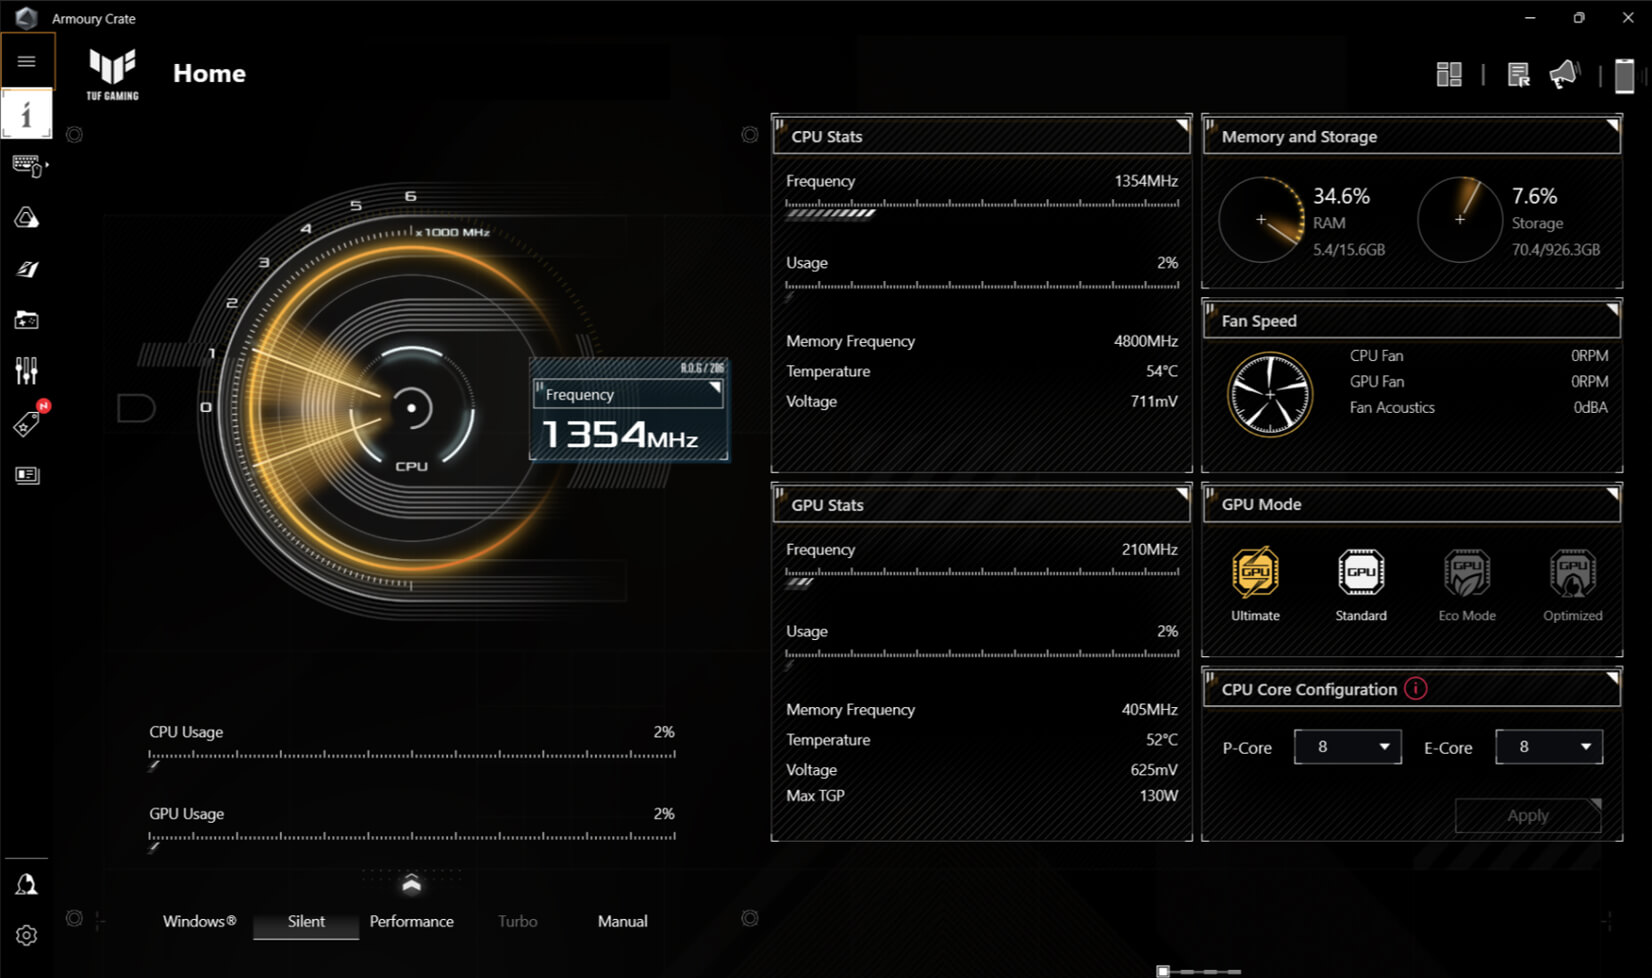 A screenshot of Armoury Crate software showing system status and toggle-able functions.